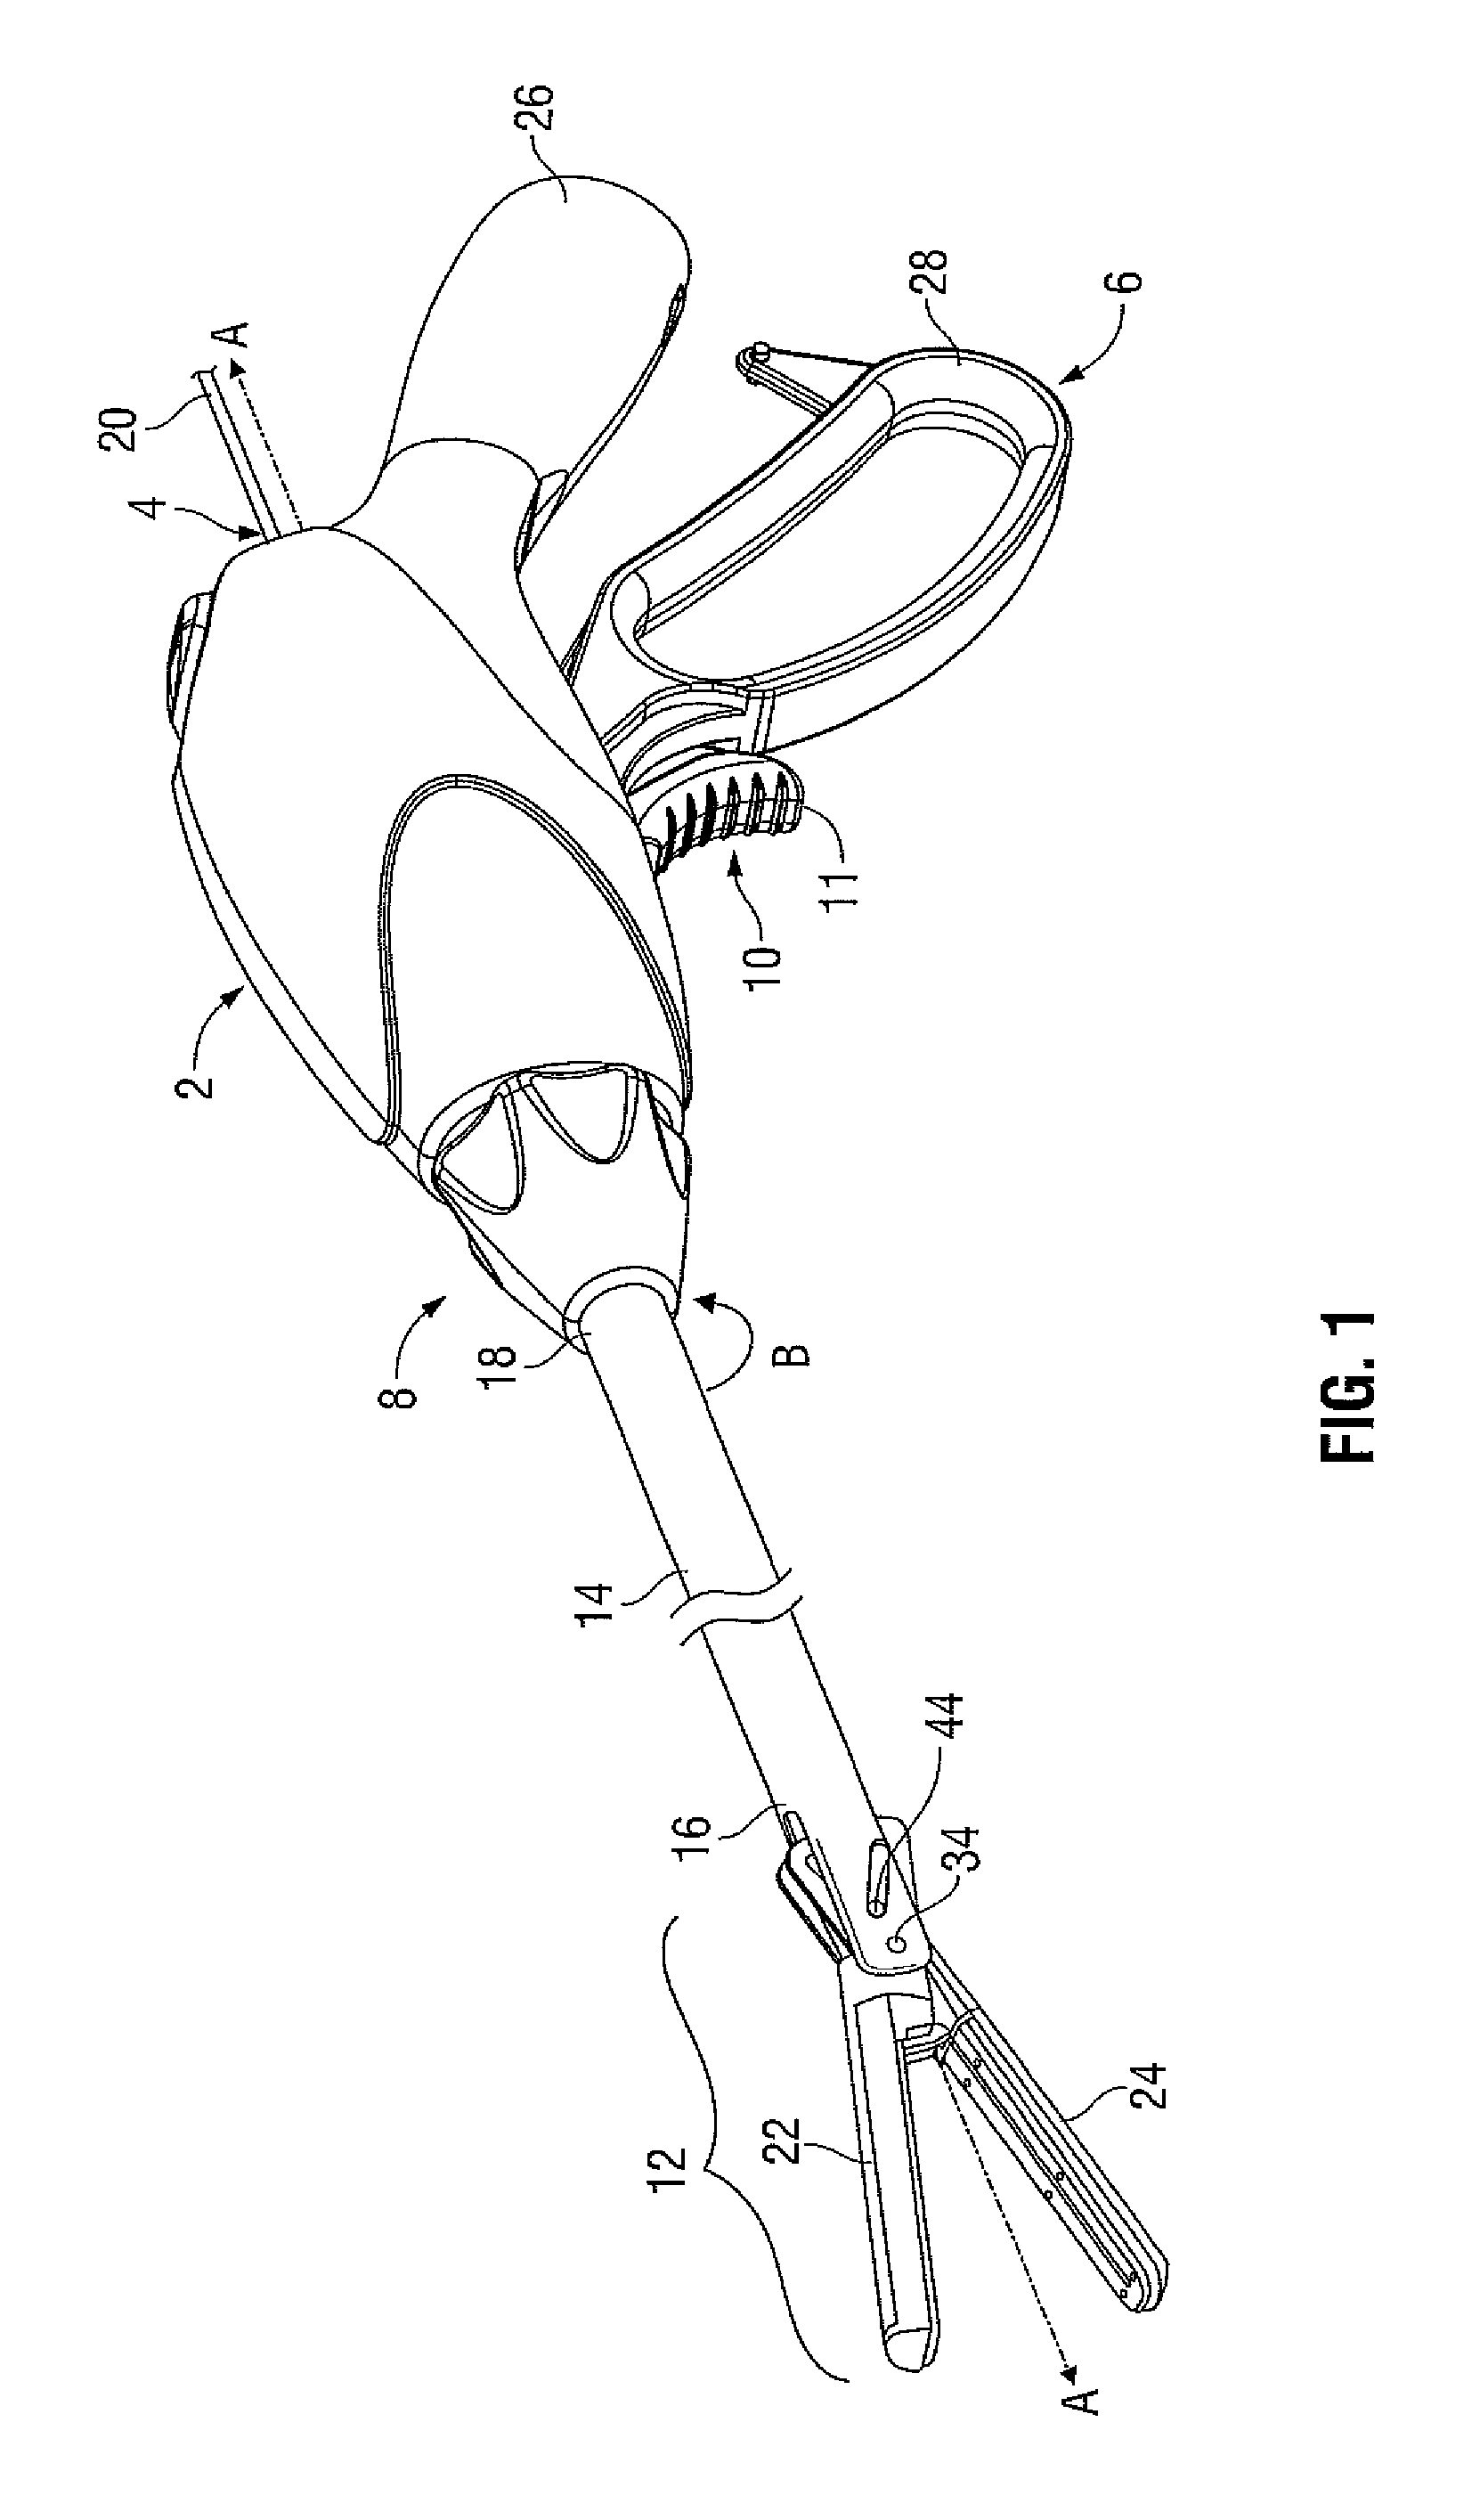 Electrosurgical instrument with a knife blade lockout mechanism